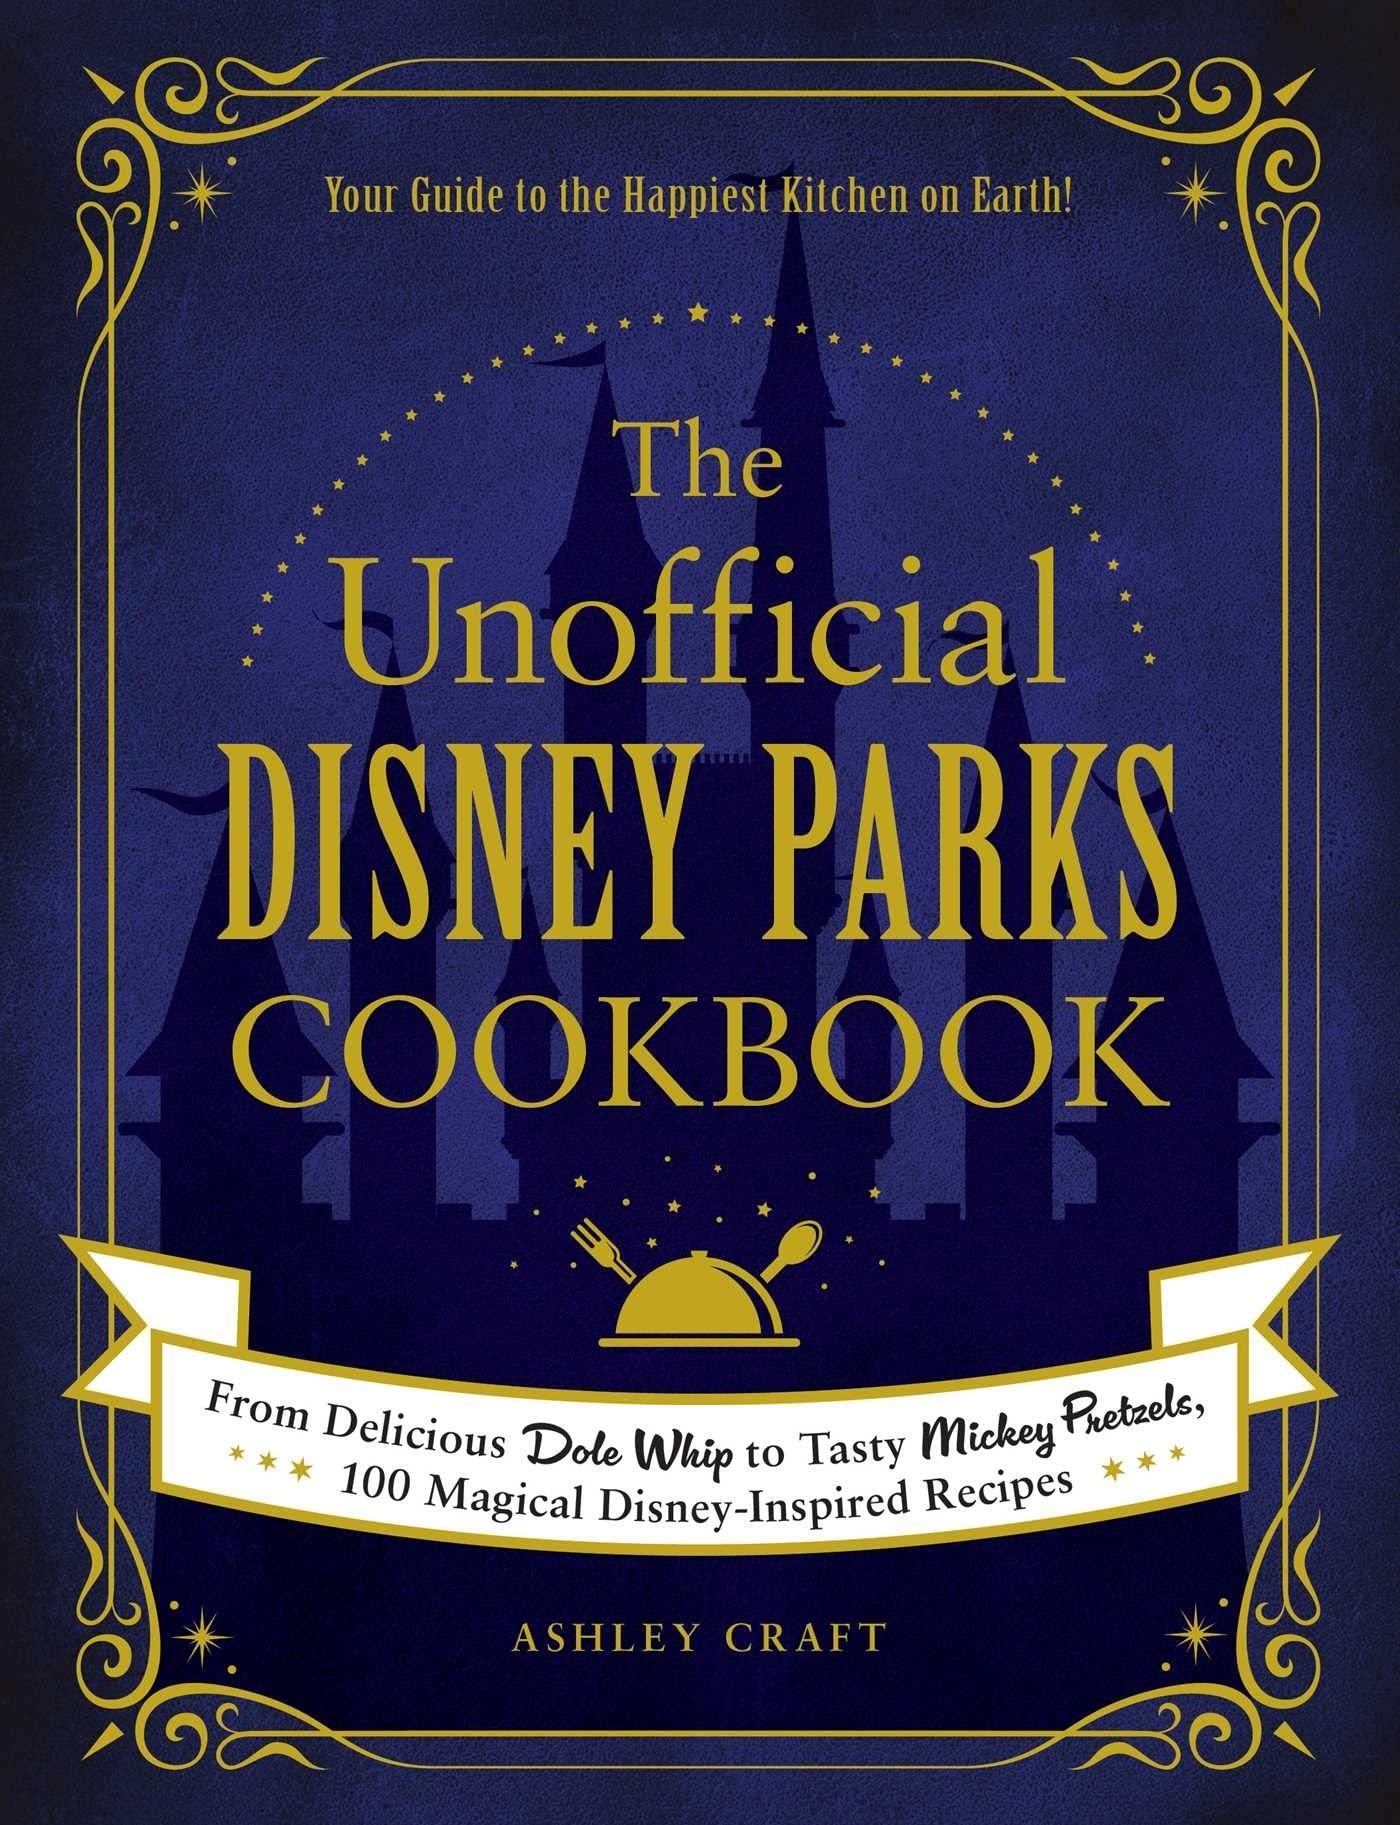 The dark blue Unofficial Disney Parks Cookbook cover featuring the castle from the Magic Kingdom in the background